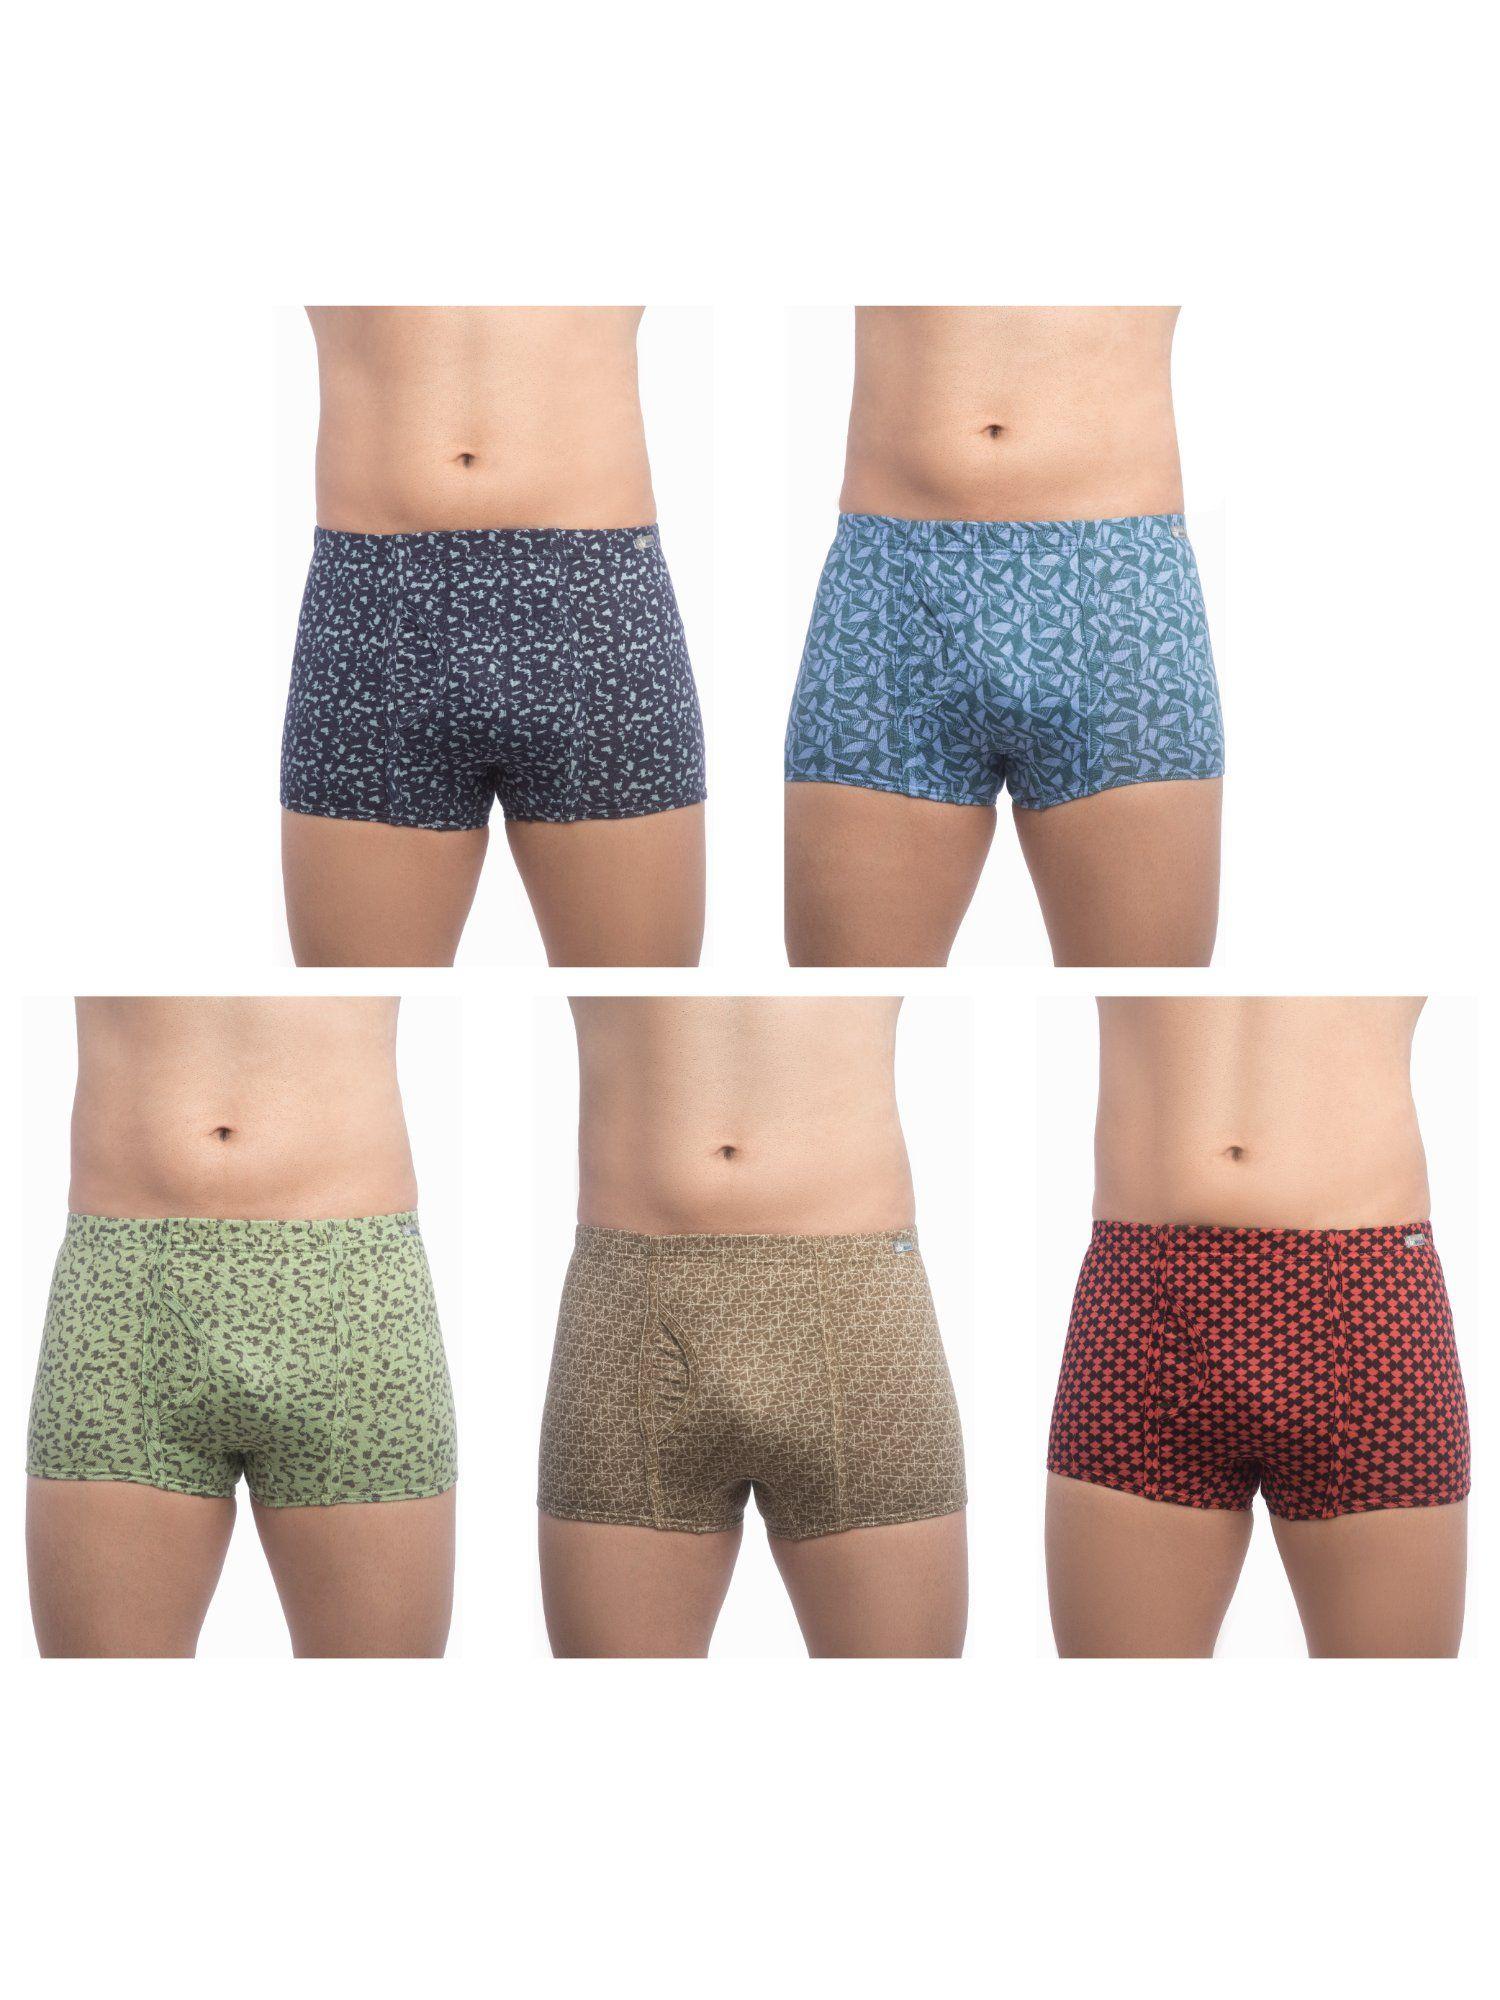 mens cotton brando printed mini trunks, colors & prints may vary (pack of 5)